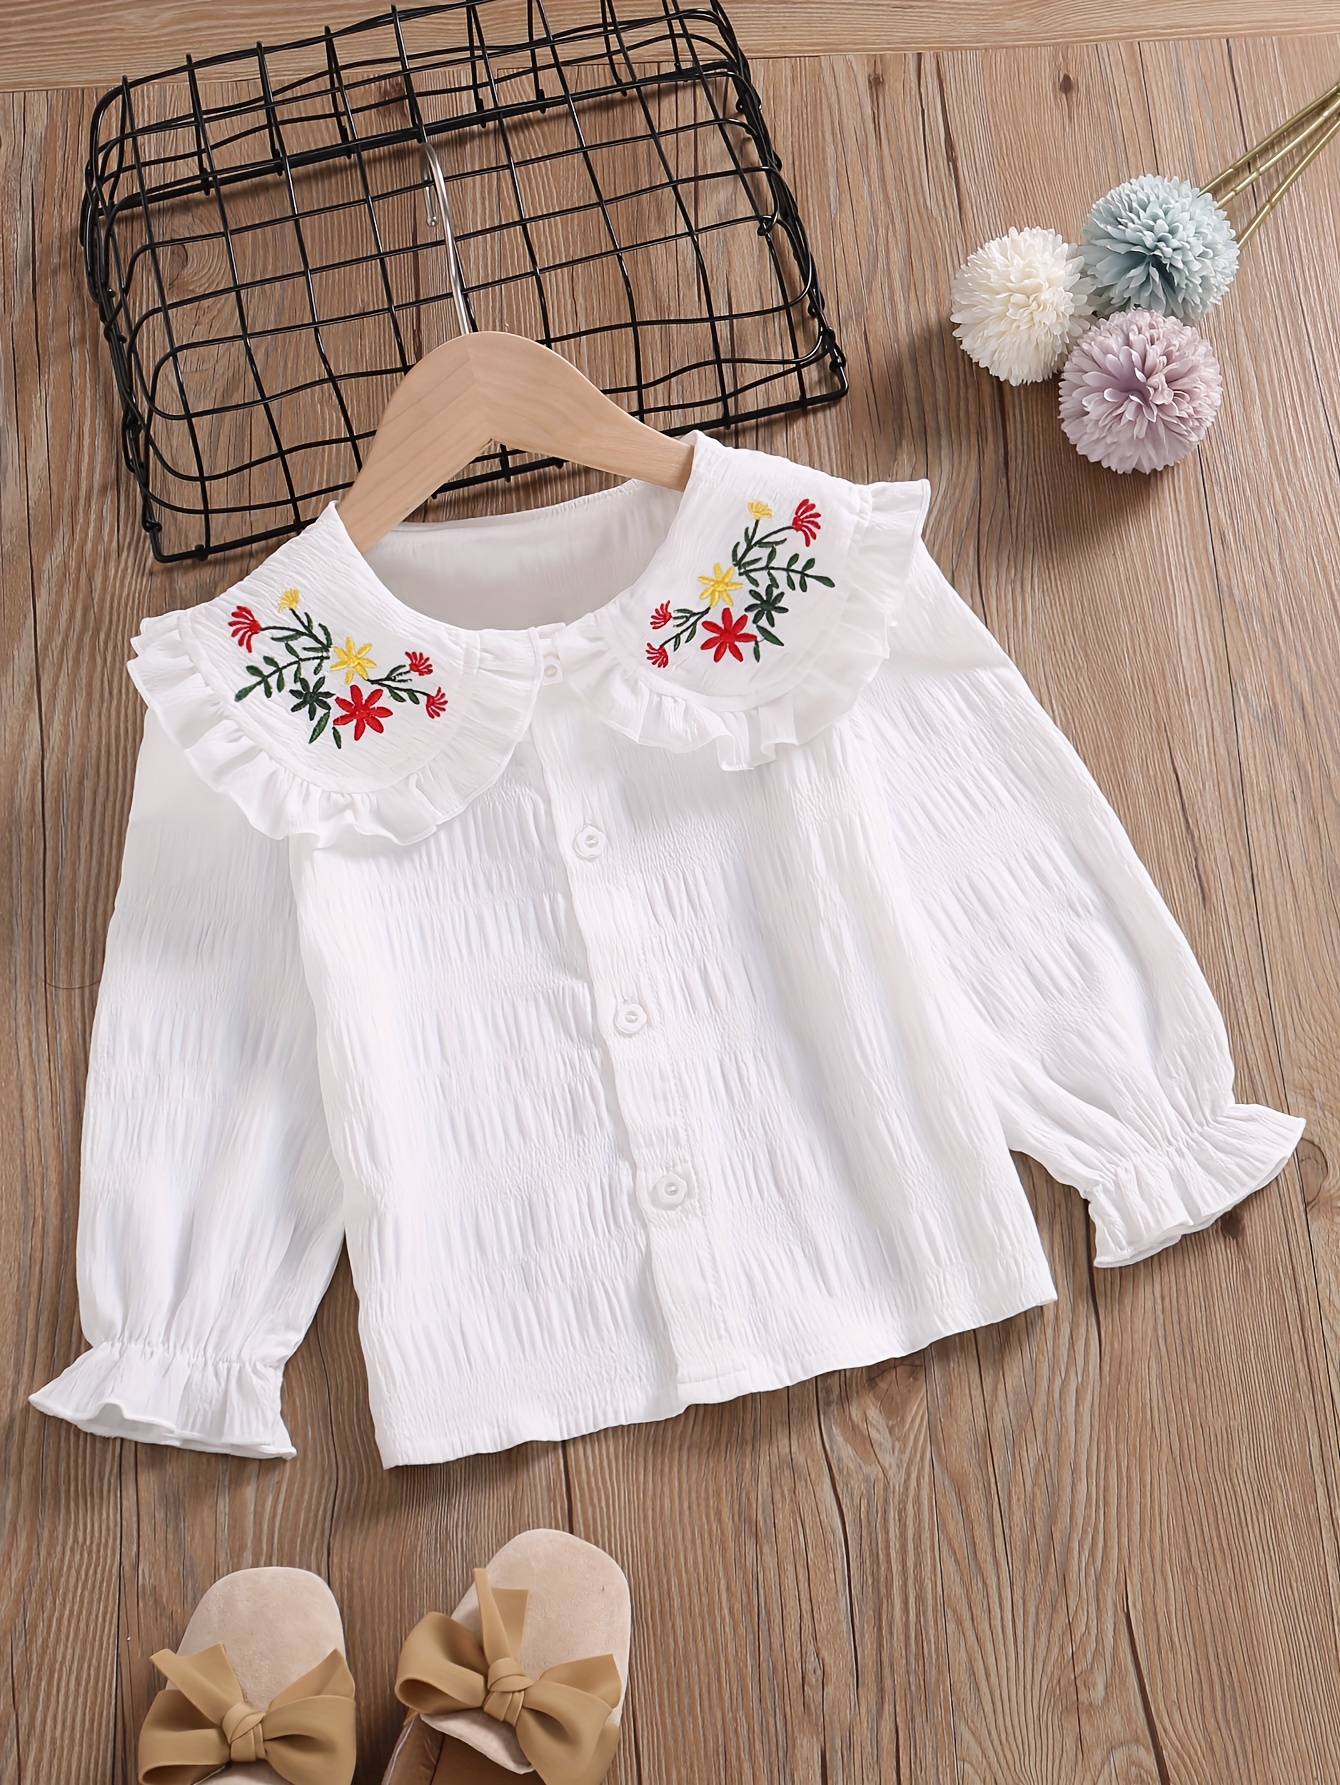 Baby Girls' Long Sleeves T-shirts Spring Autumn Kids Girl Cotton Cute Tops  Children's Trendy Embroidery Top Girls Clothes